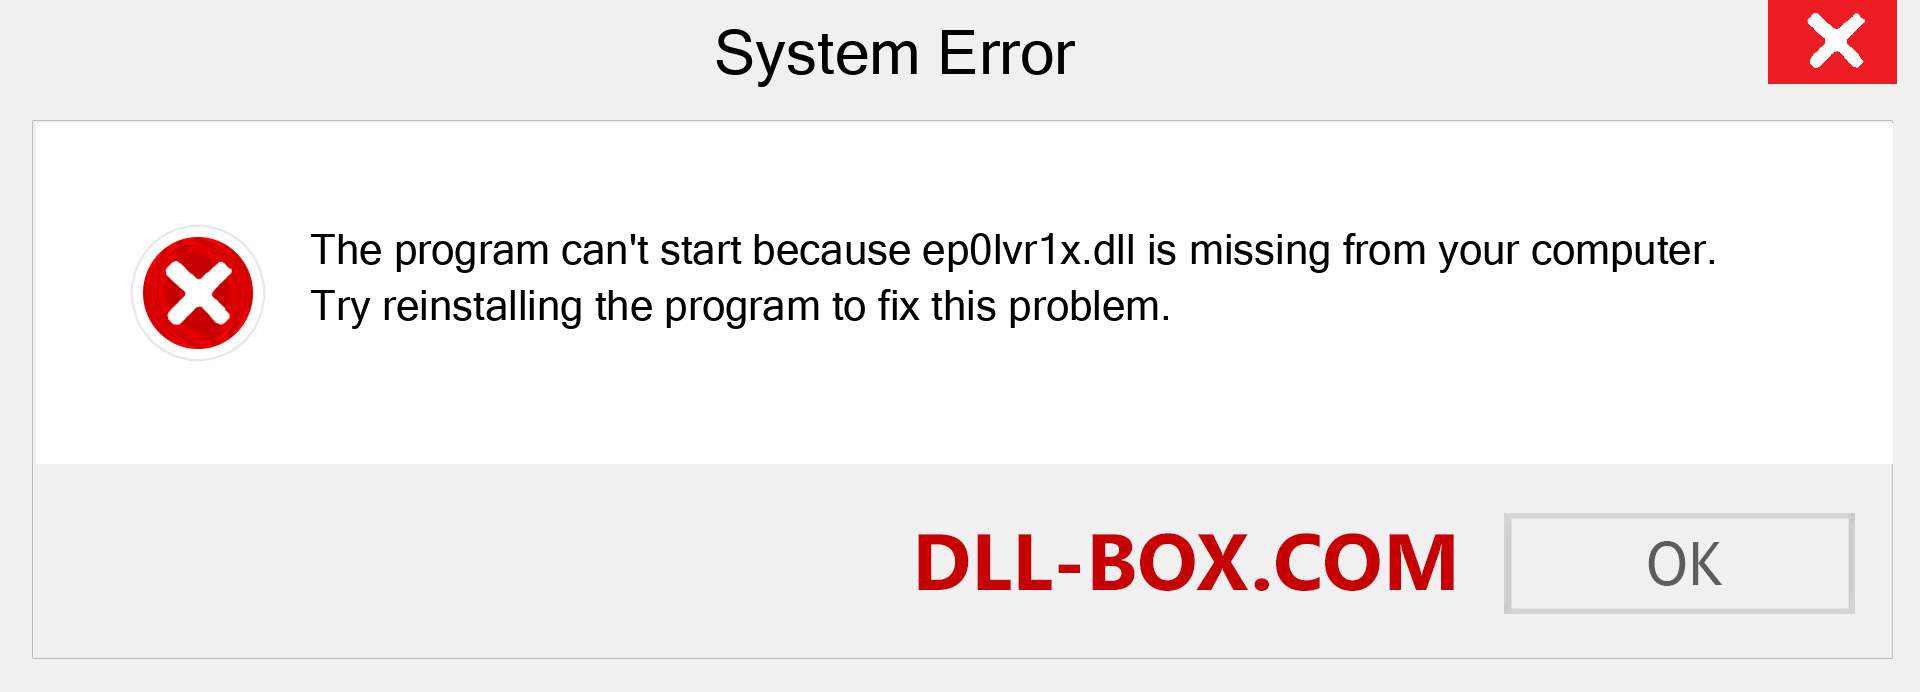  ep0lvr1x.dll file is missing?. Download for Windows 7, 8, 10 - Fix  ep0lvr1x dll Missing Error on Windows, photos, images